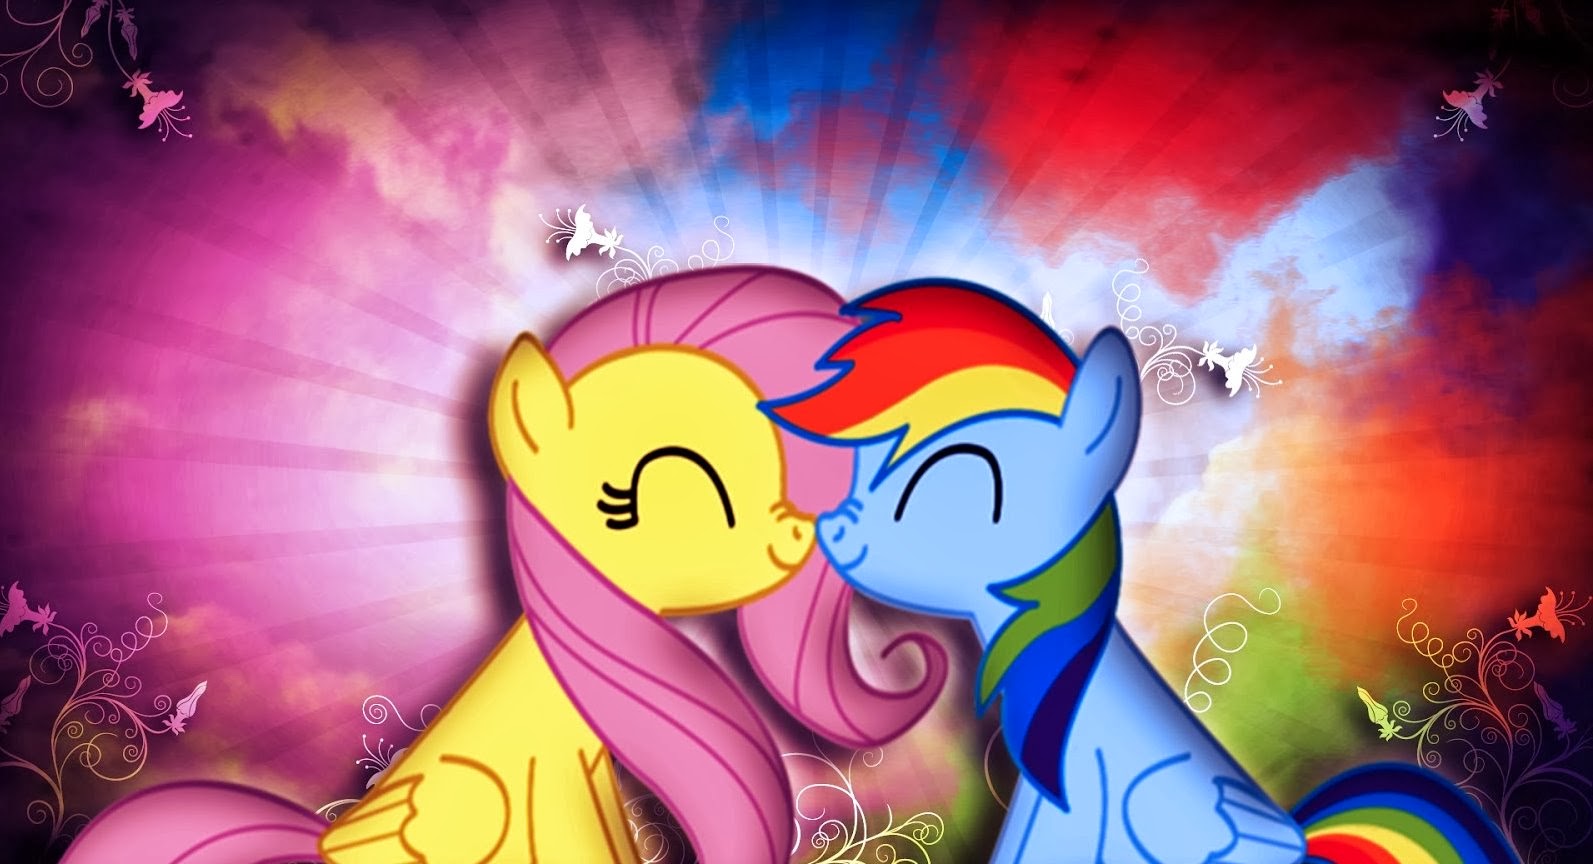  Cartoon  wallpaper  for valentines  day 2014 All HD 